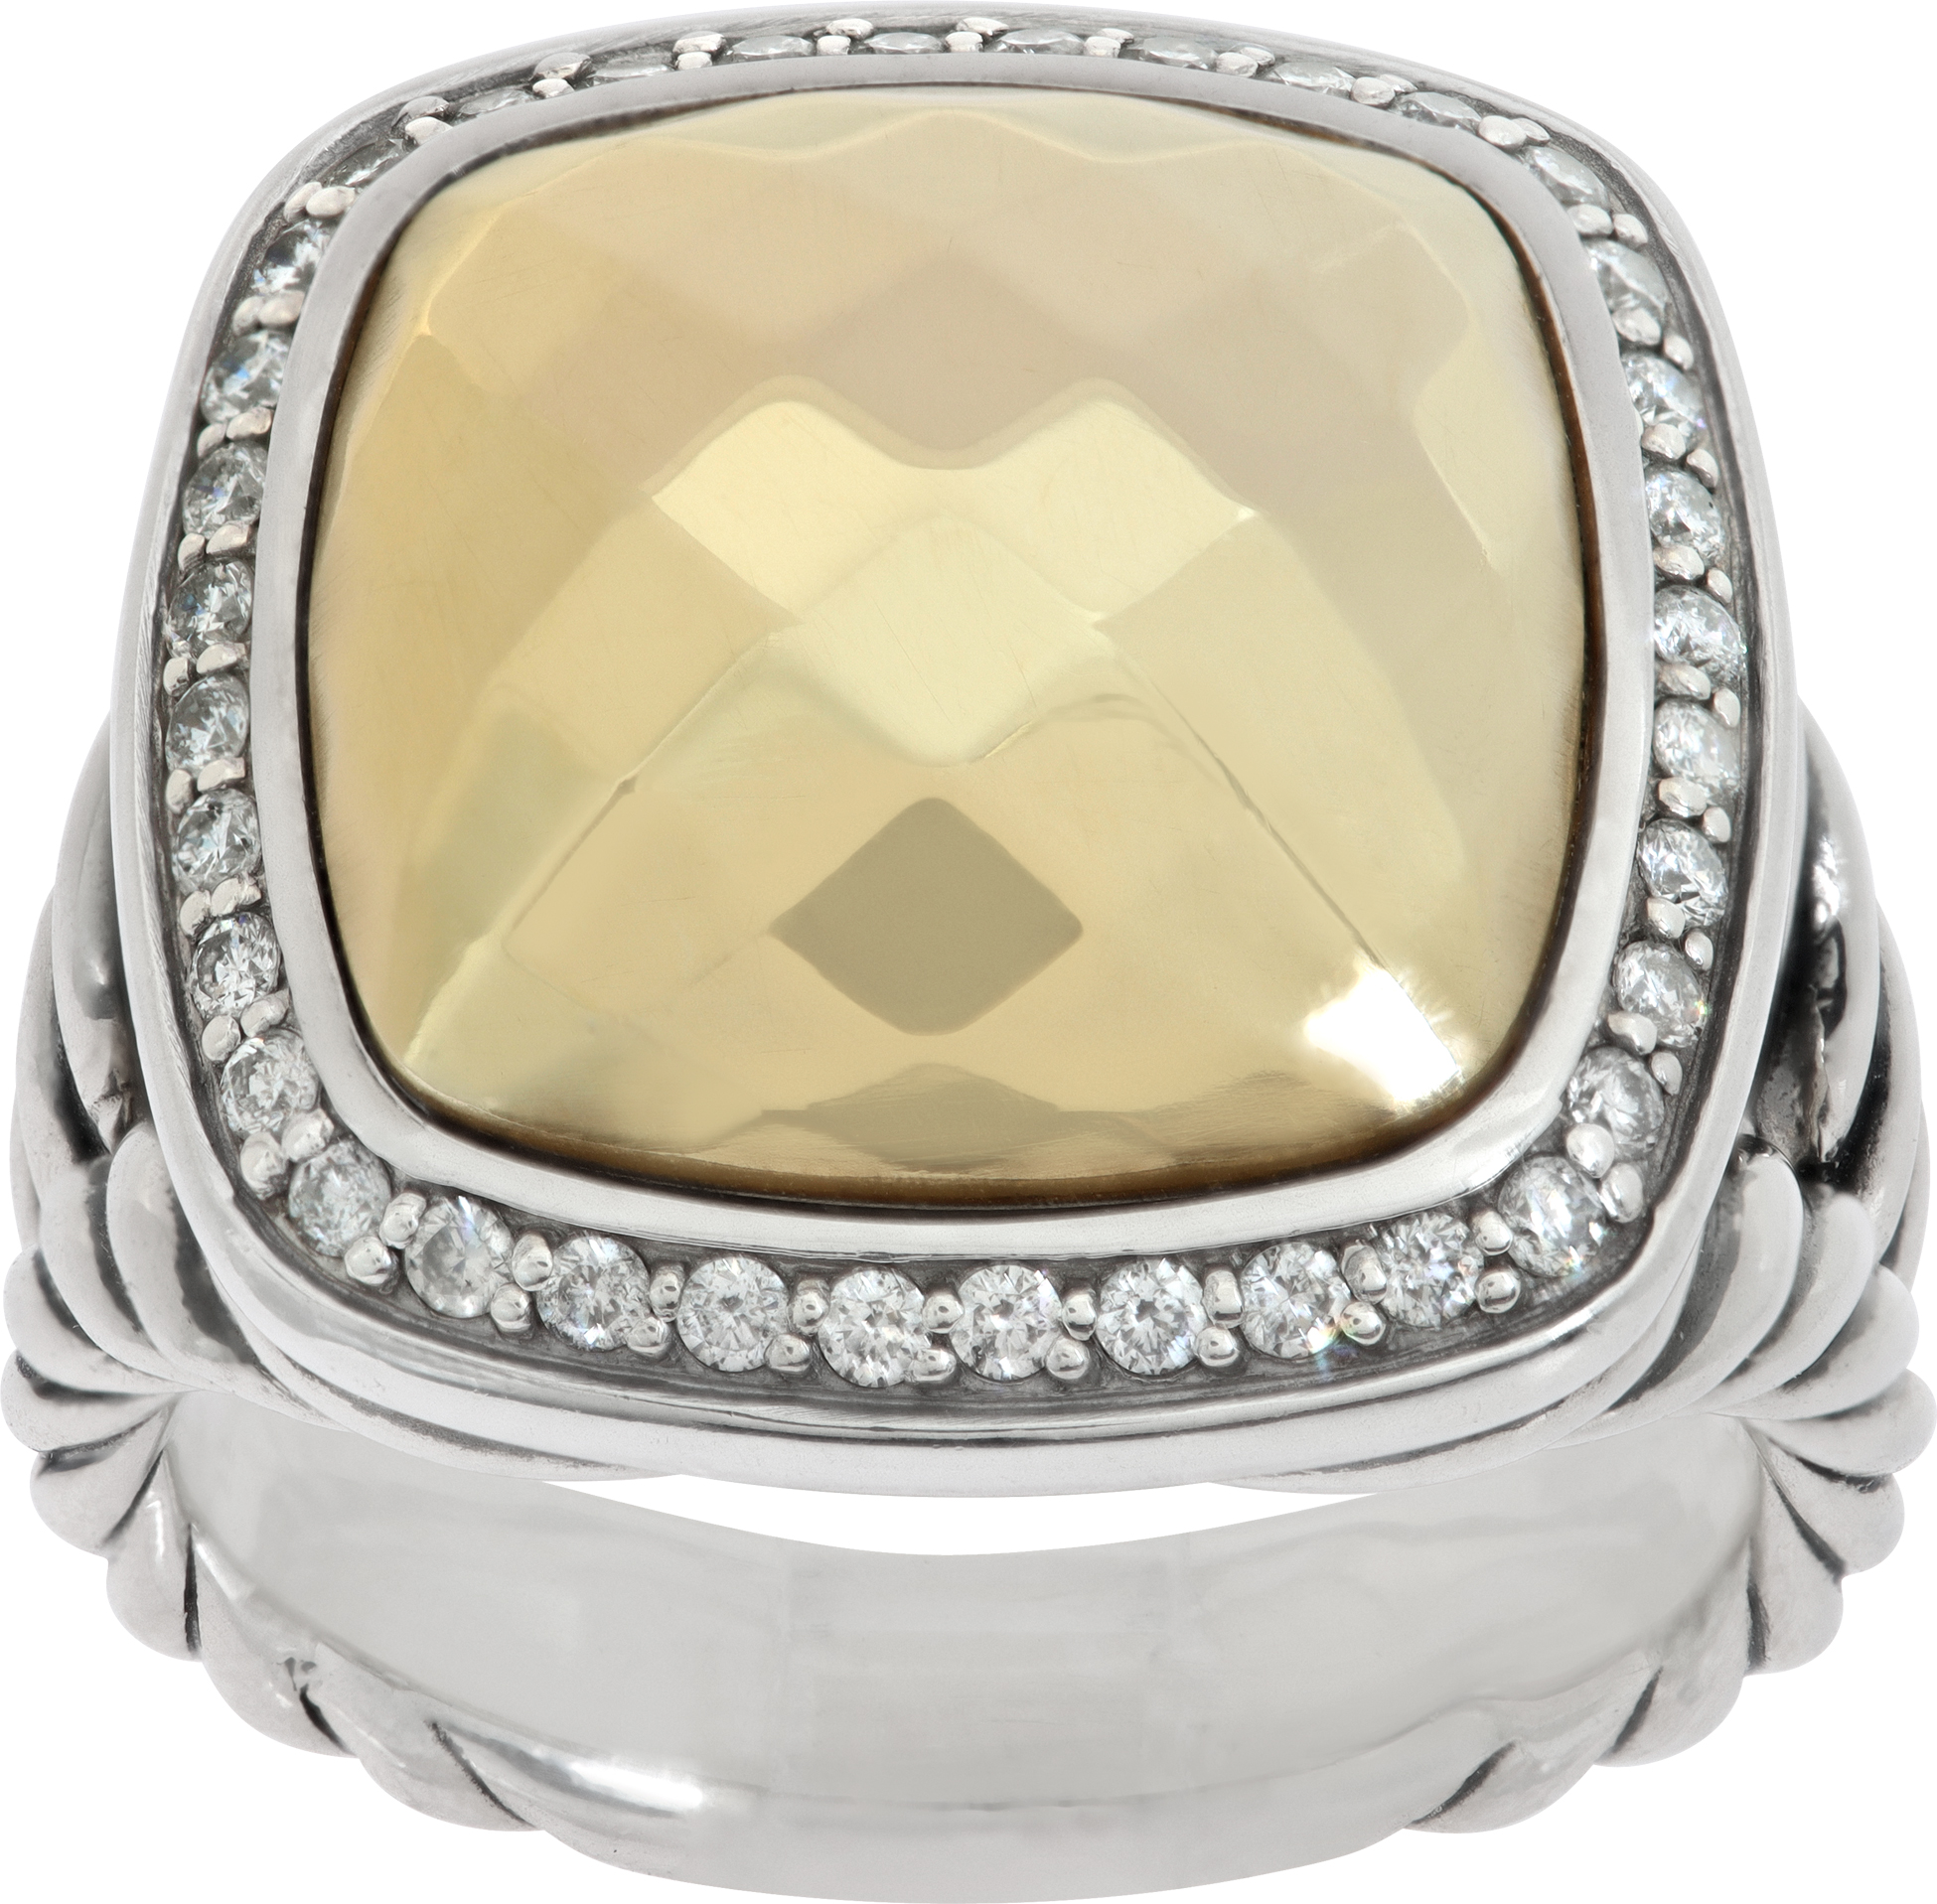 David Yurman Diamonds Albion collection ring in 18K yellow gold & Sterling silver. (Stones)